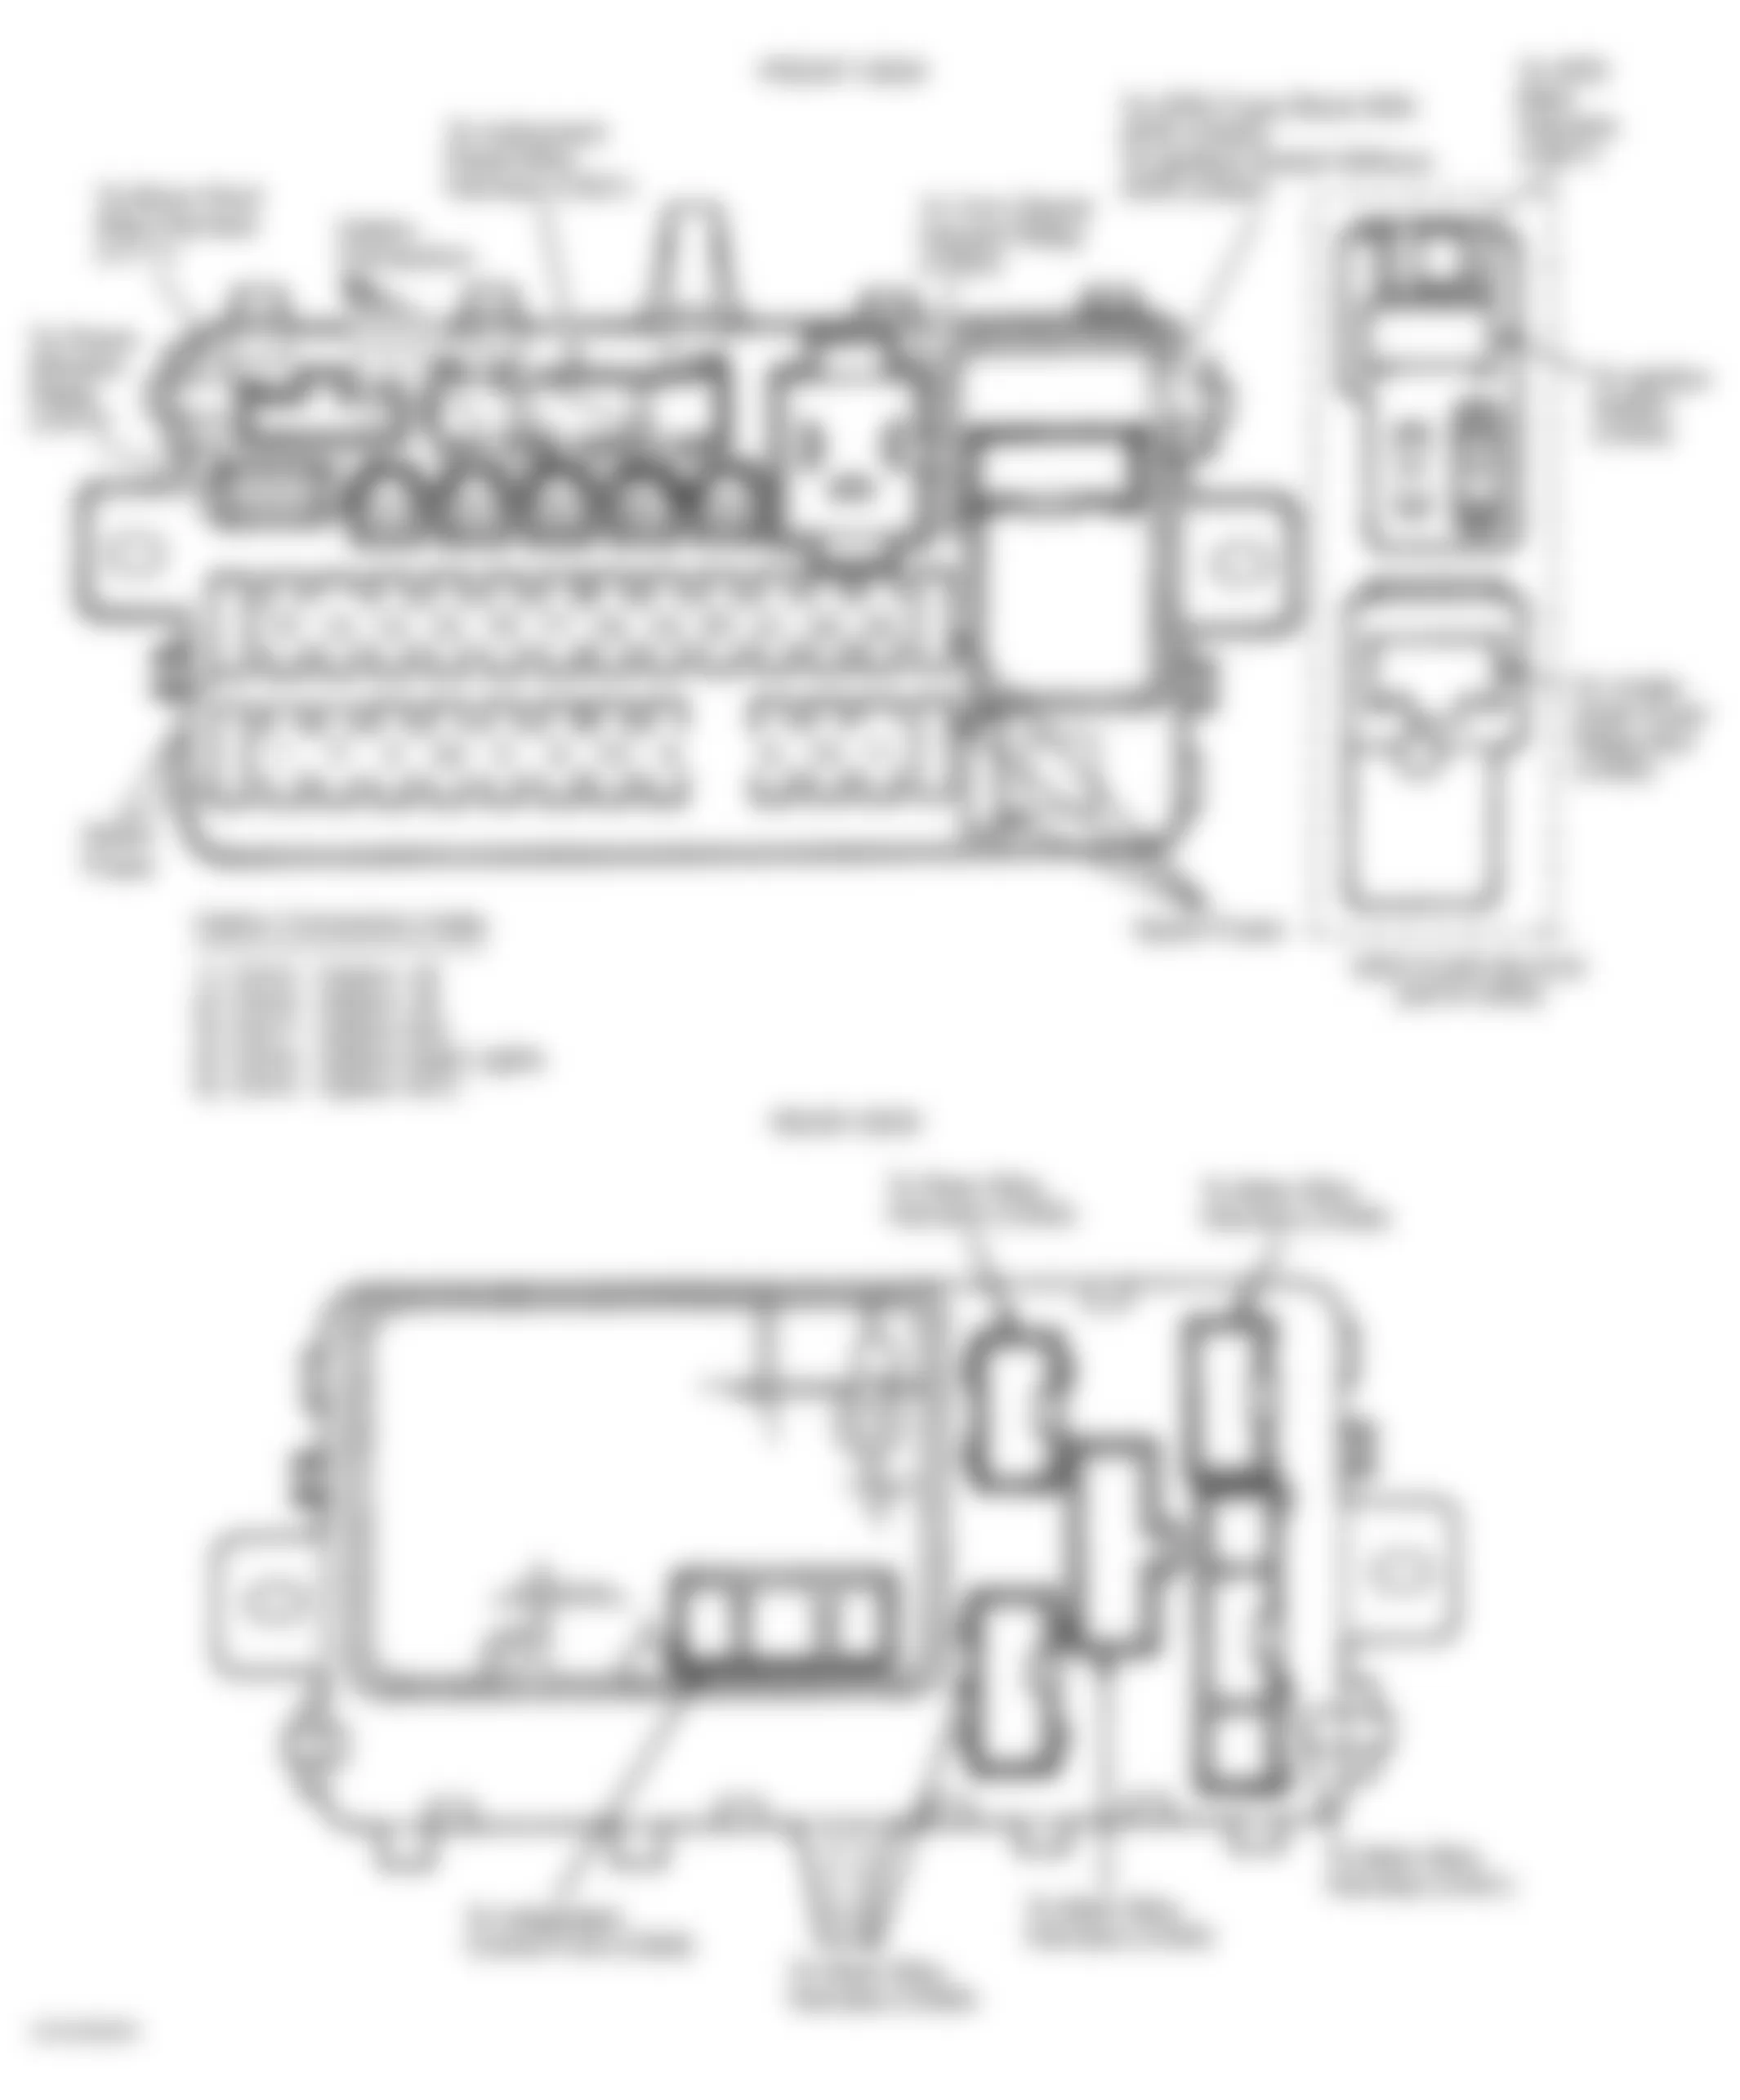 Honda Civic EX 1993 - Component Locations -  Identifying Under-Dash Fuse/Relay Box Components (1994-95 Civic)